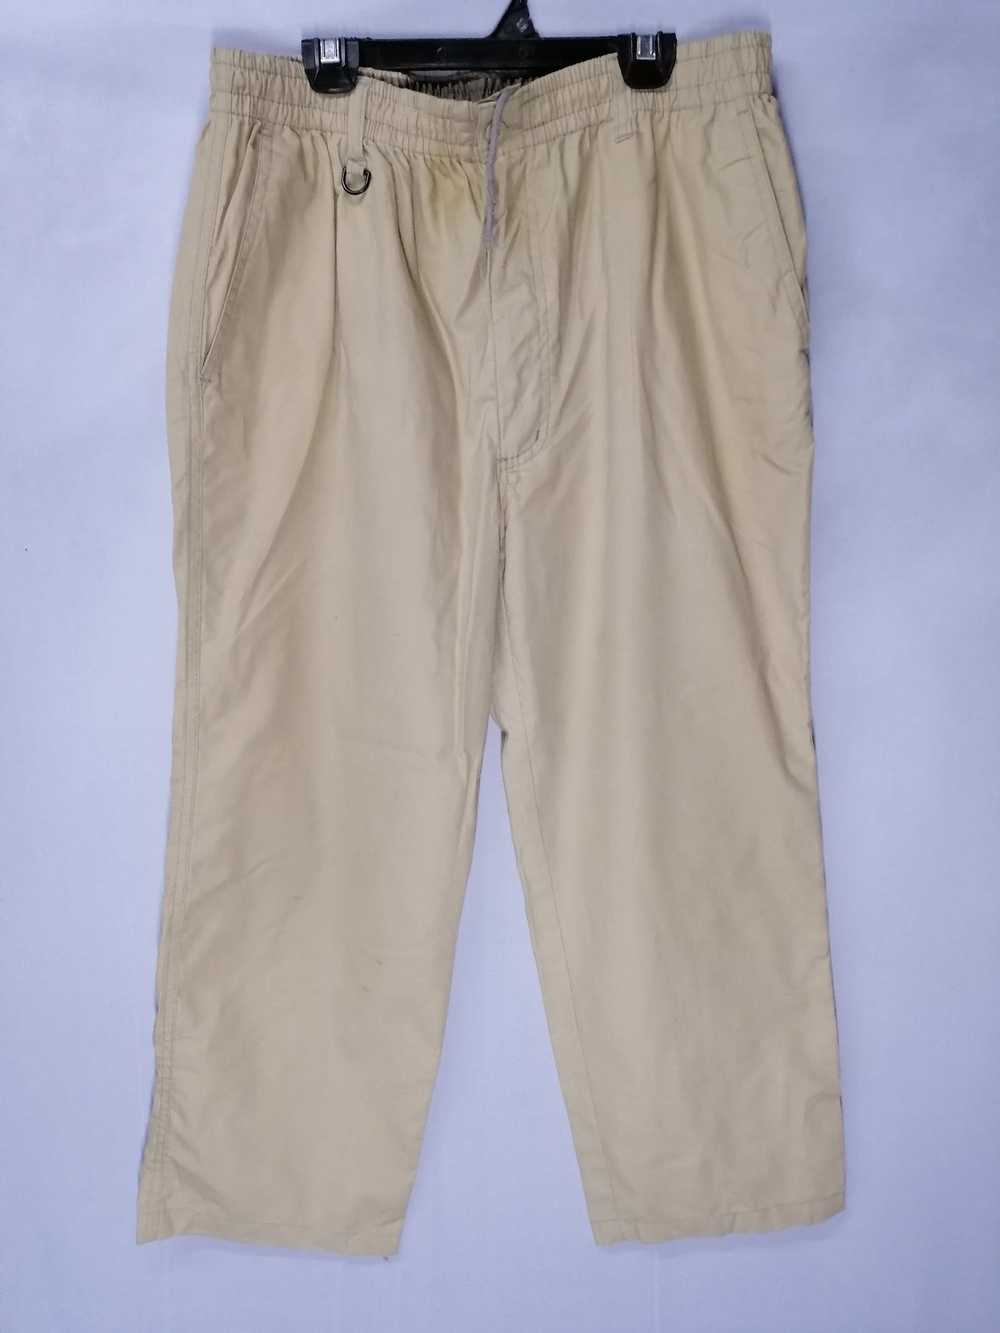 Japanese Brand First Down Crop Pant - image 1